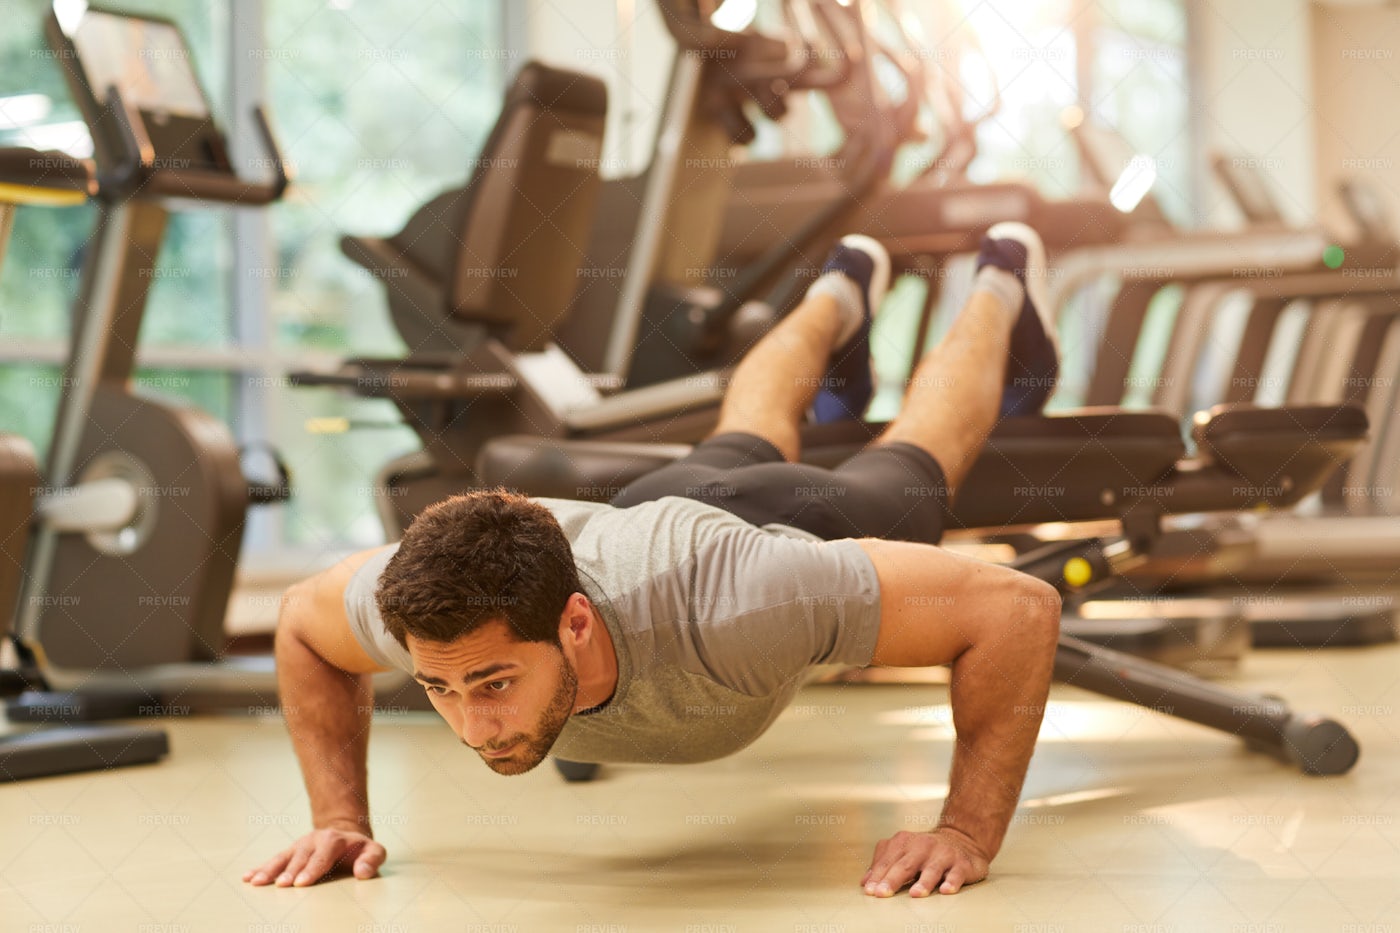 Man Working Out In Gym: Stock Photos